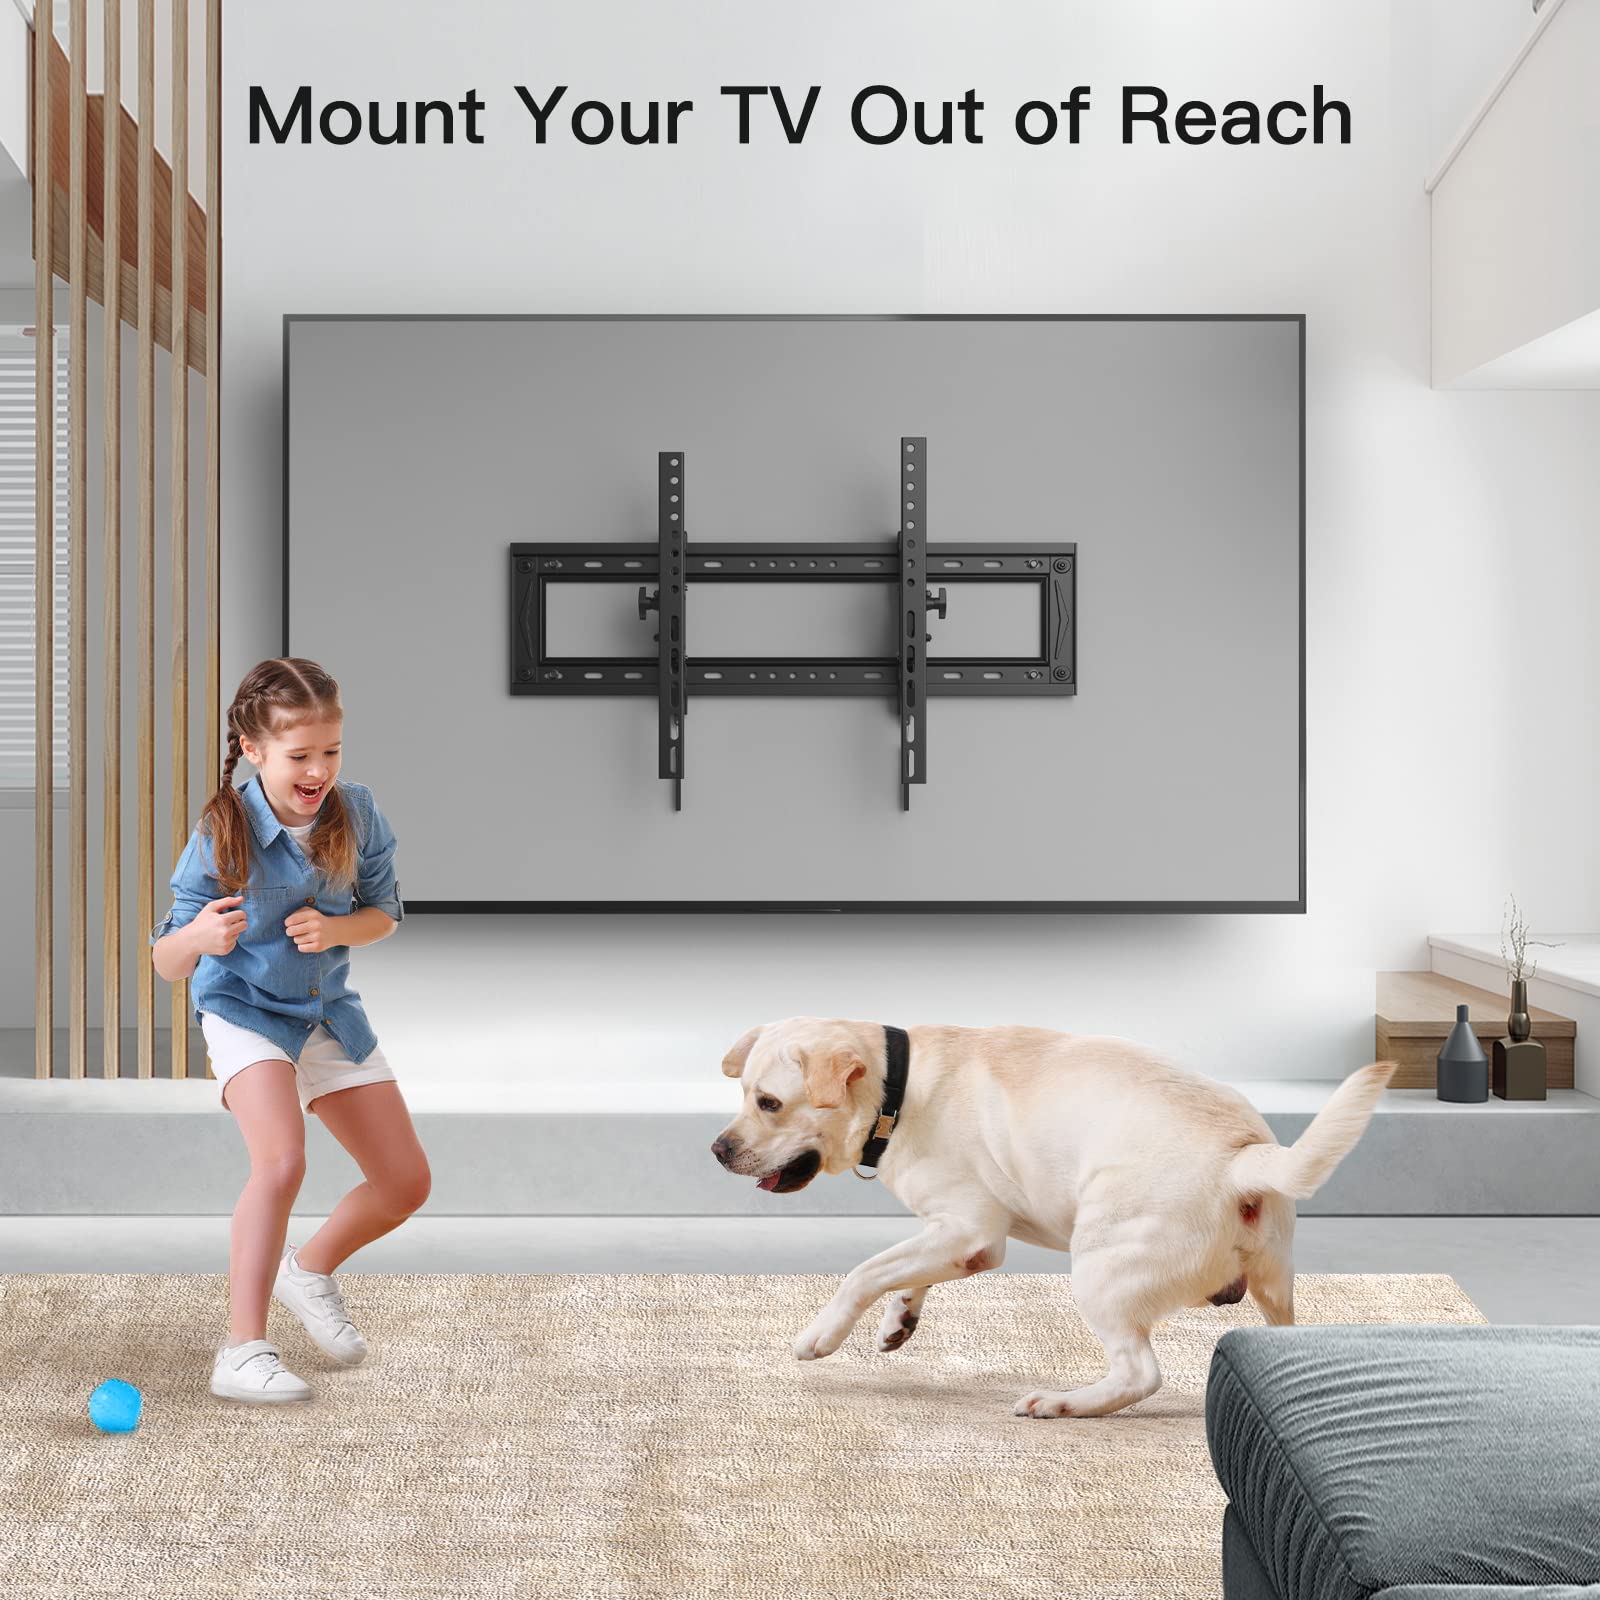 Pipishell Advanced Tilt TV Wall Mount Bracket Extentable for Most 50-90 inch 4K OLED QLED LCD LED Flat and Curved TVs up to 132 lbs, Max VESA 600x400mm, Fits 16, 18, 24 Inch Wood Stud Spacing